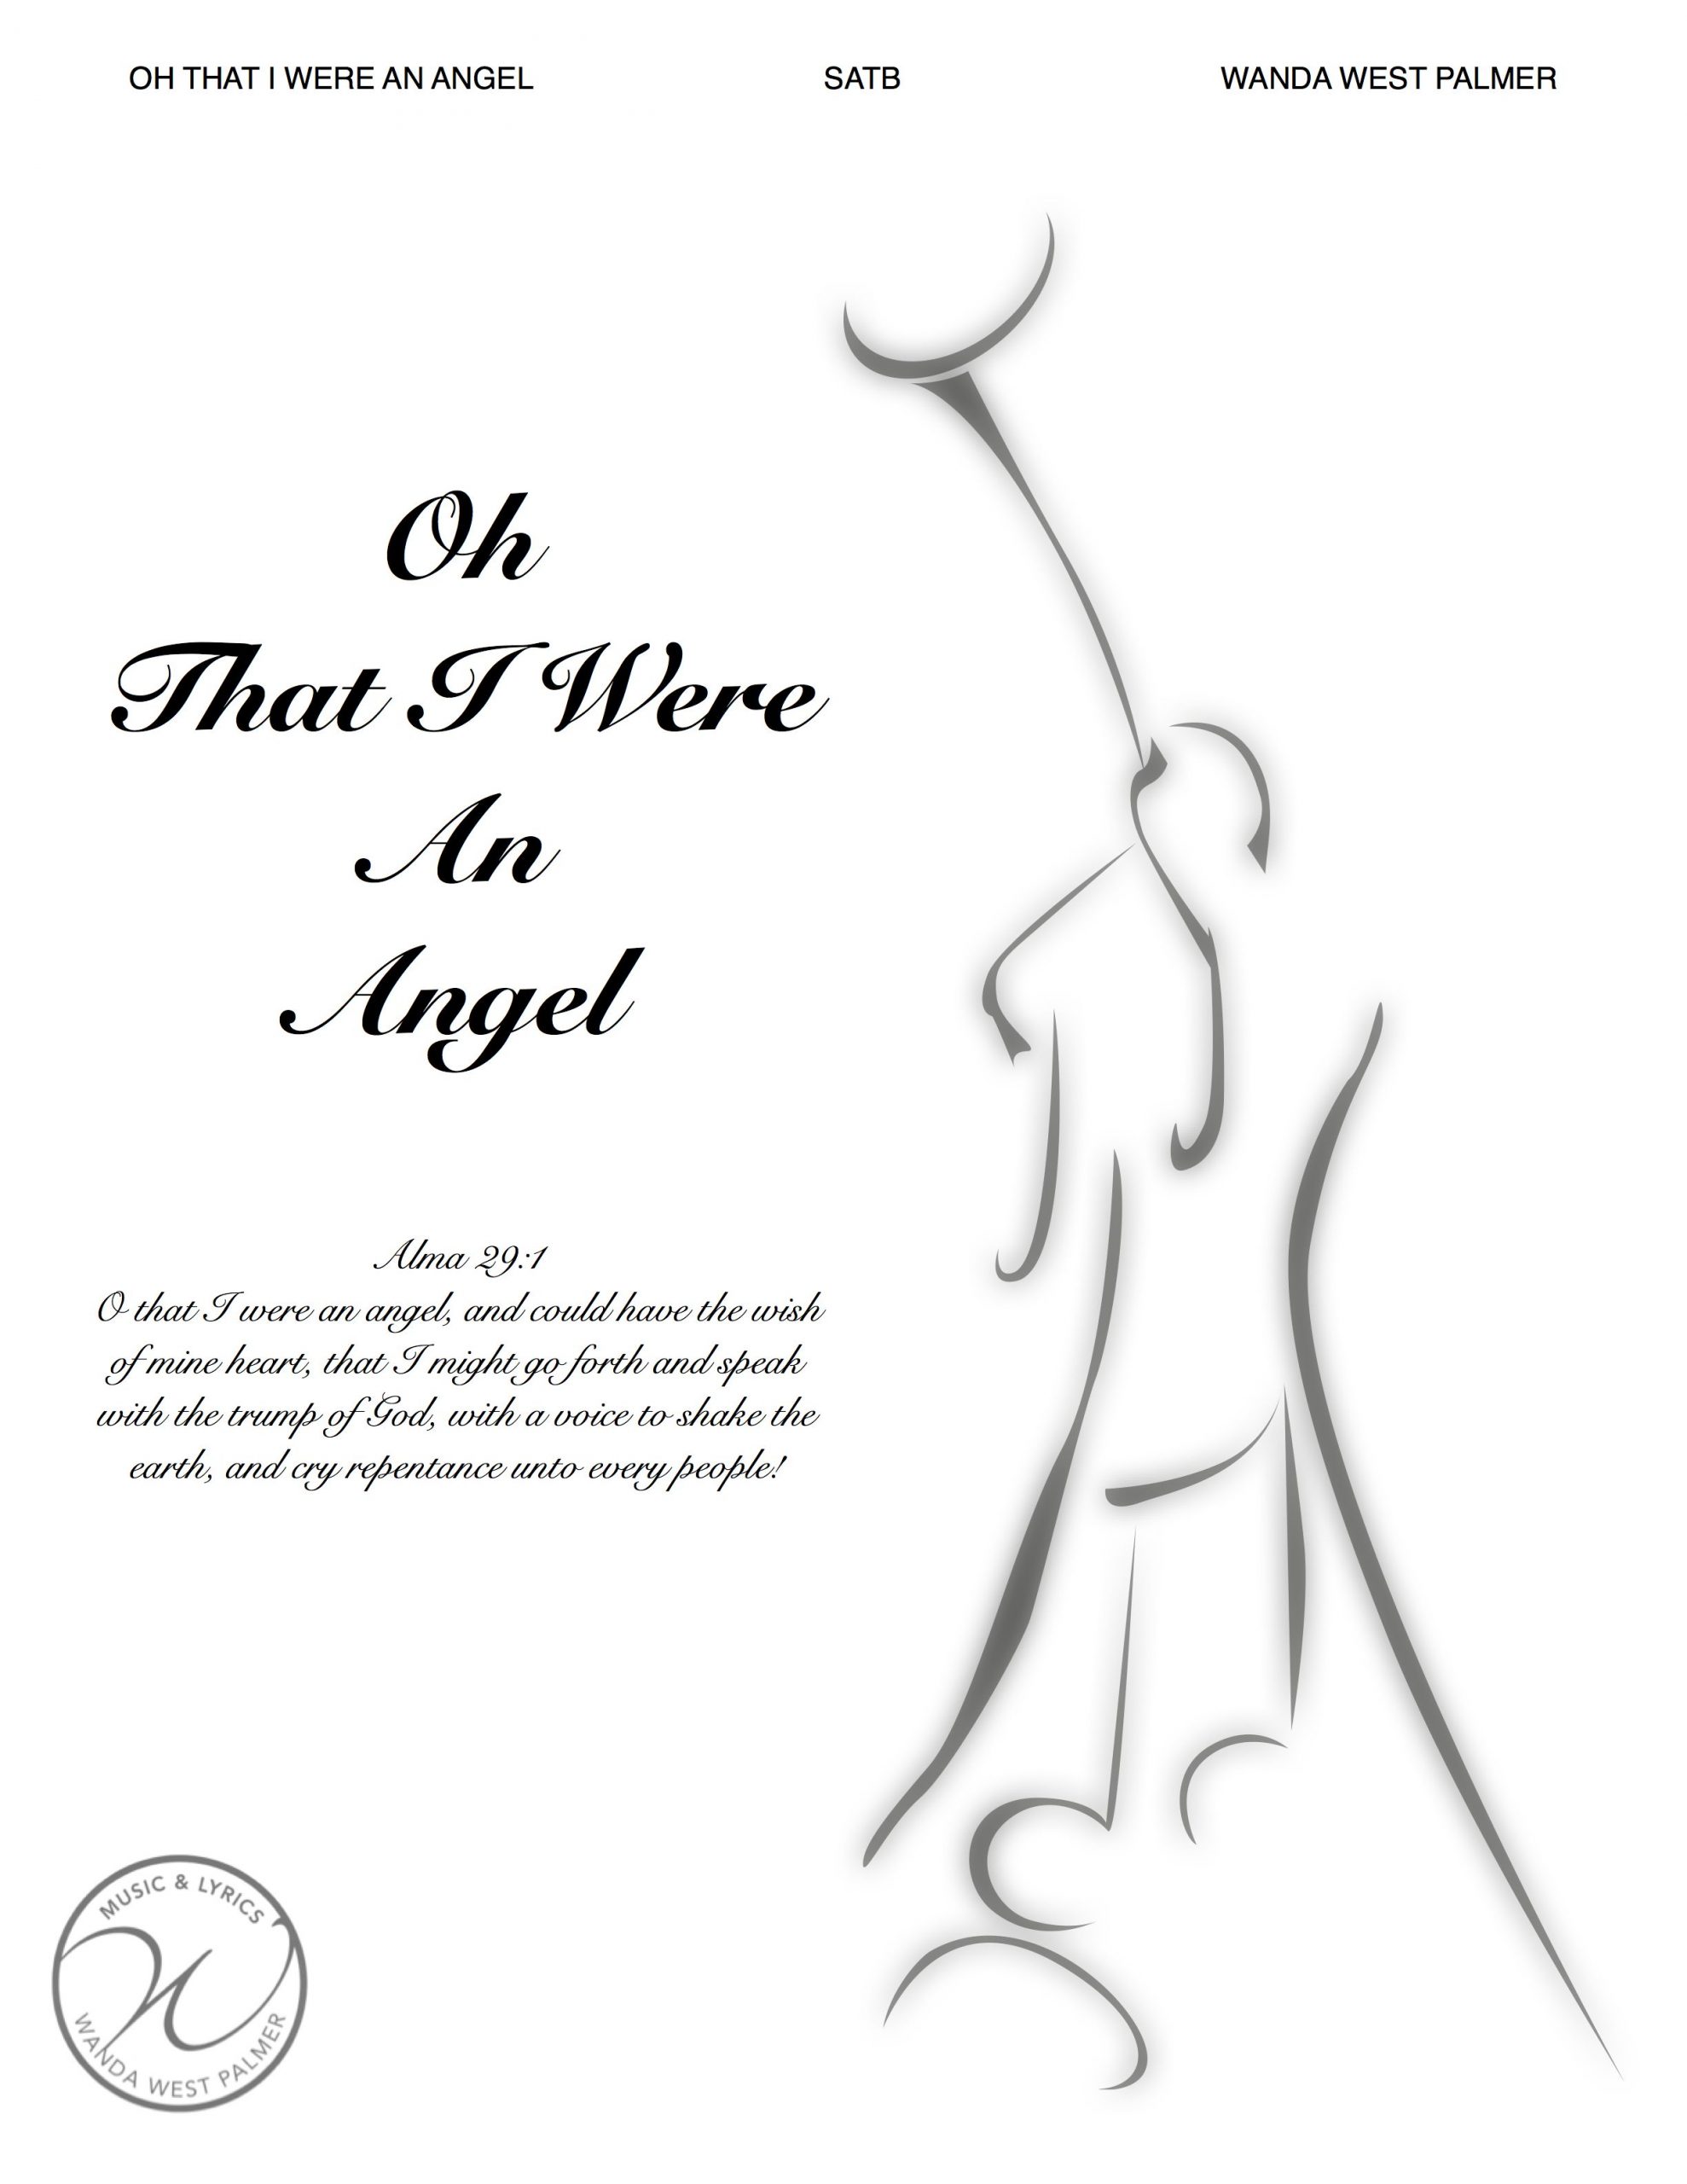 Oh That I Were an Angel - Sheet Music Authority